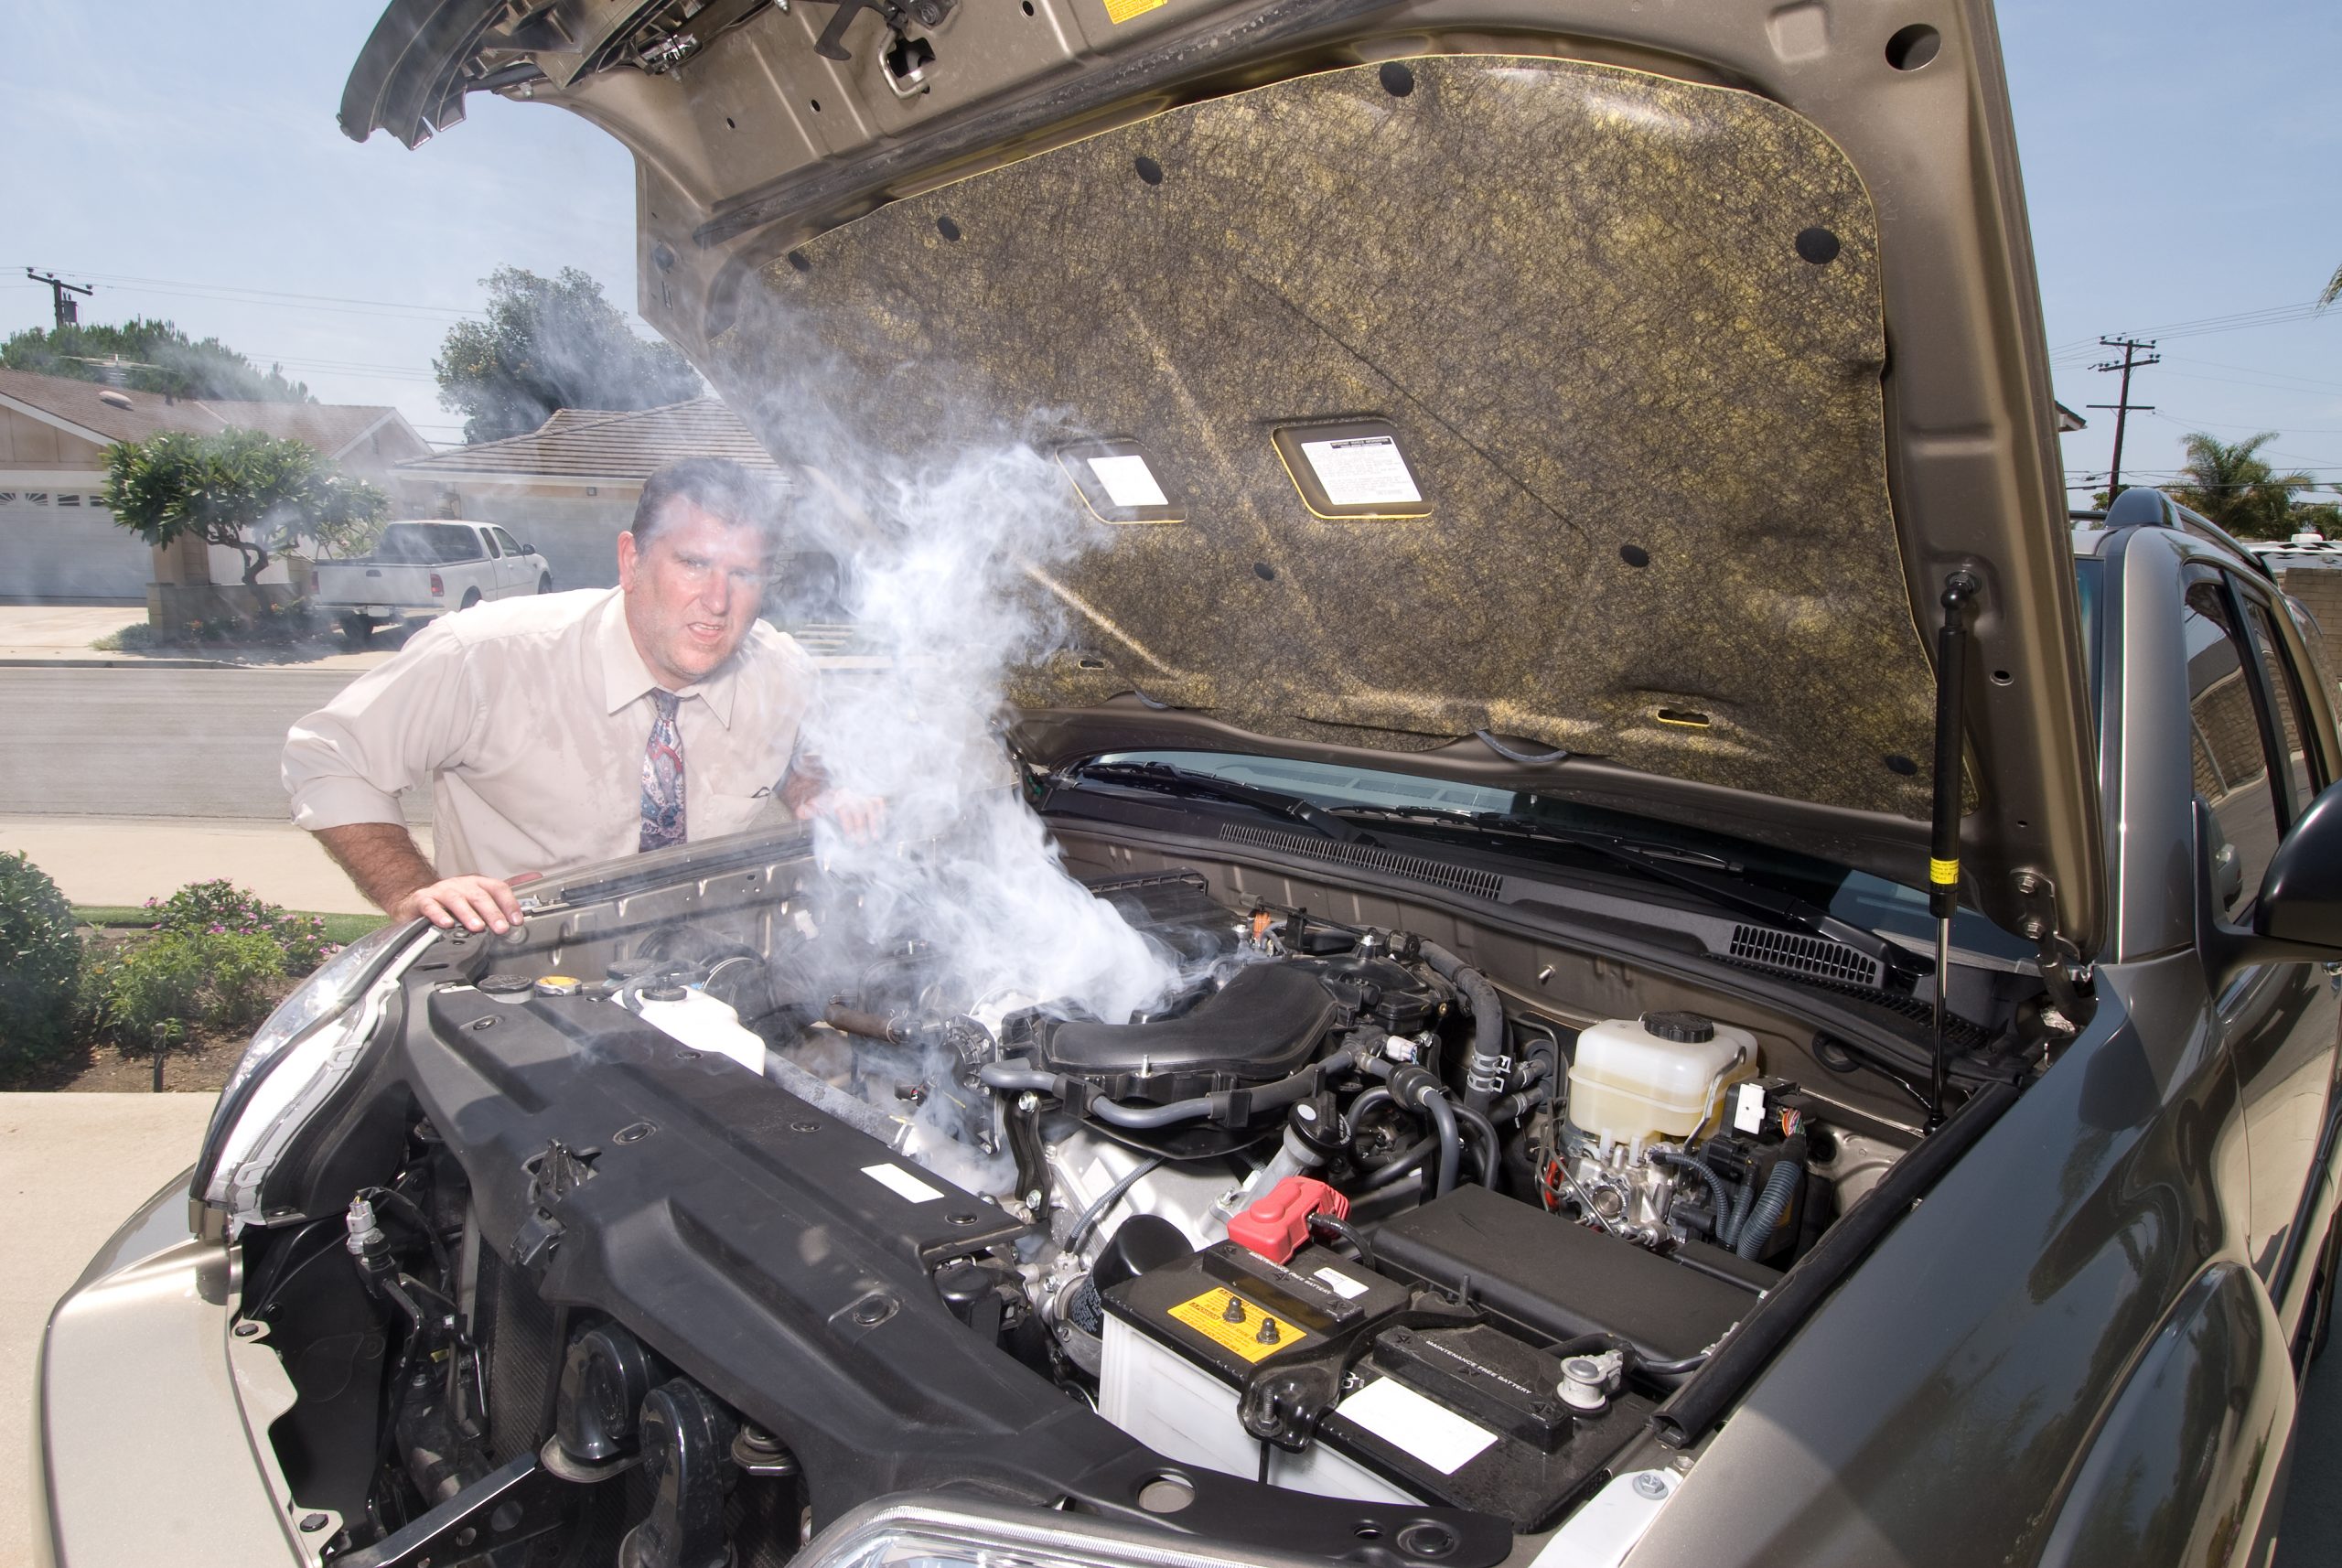 Cash For Overheated Cars With Engine Damage In Utah intended for proportions 3872 X 2592